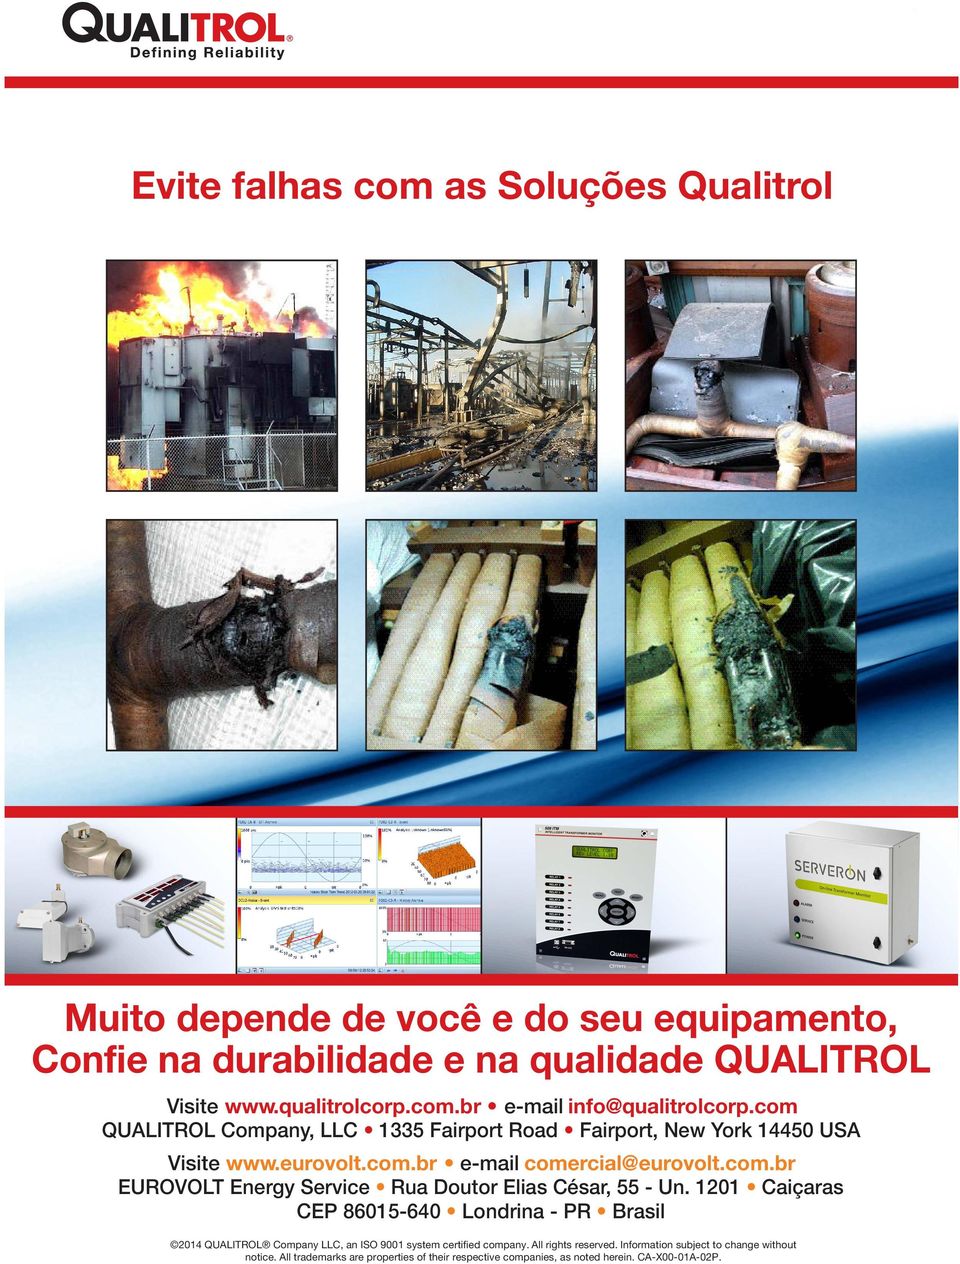 1201 Caiçaras CEP 86015-640 Londrina - PR Brasil 2014 QUALITROL Company LLC, an ISO 9001 system certified company. All rights reserved.